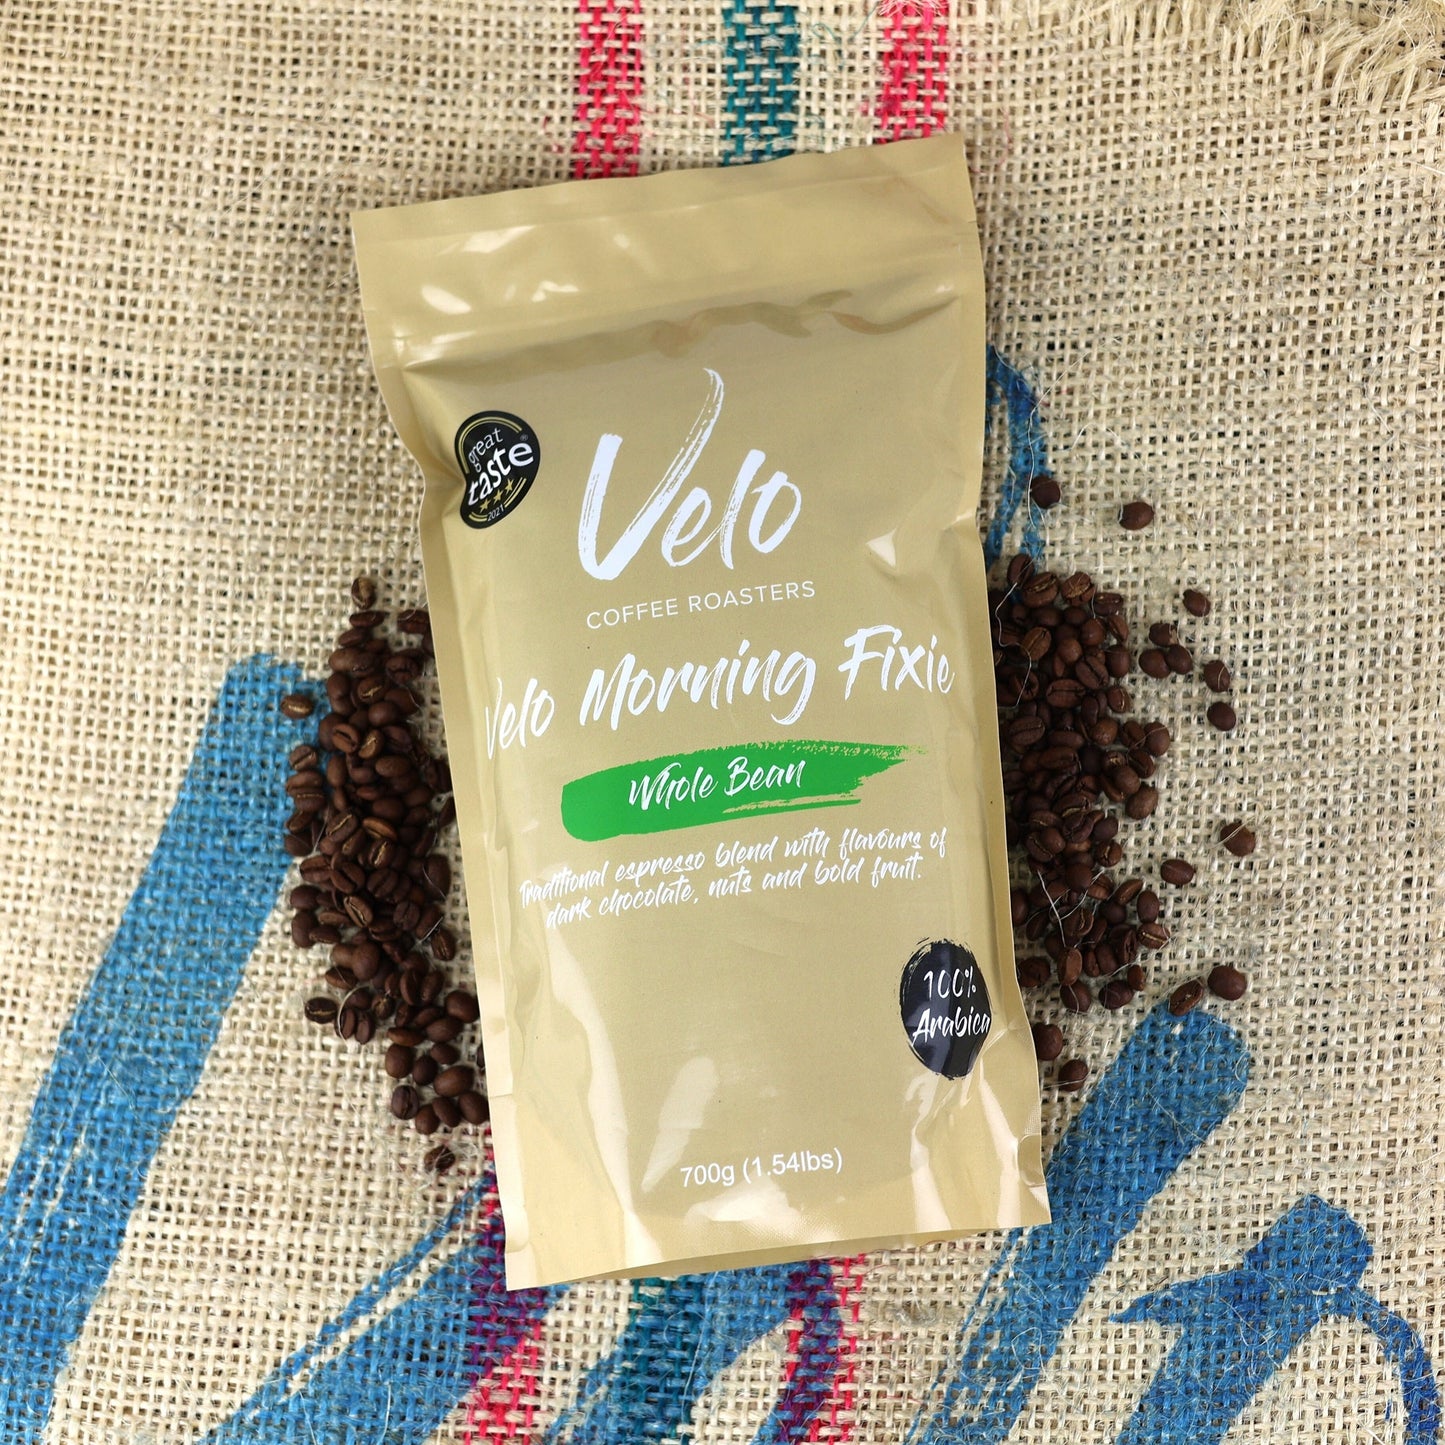 Morning Fixie 700g Coffee Bag Blend - 12 Months Pre-Paid Subscription - Velo Coffee Roasters